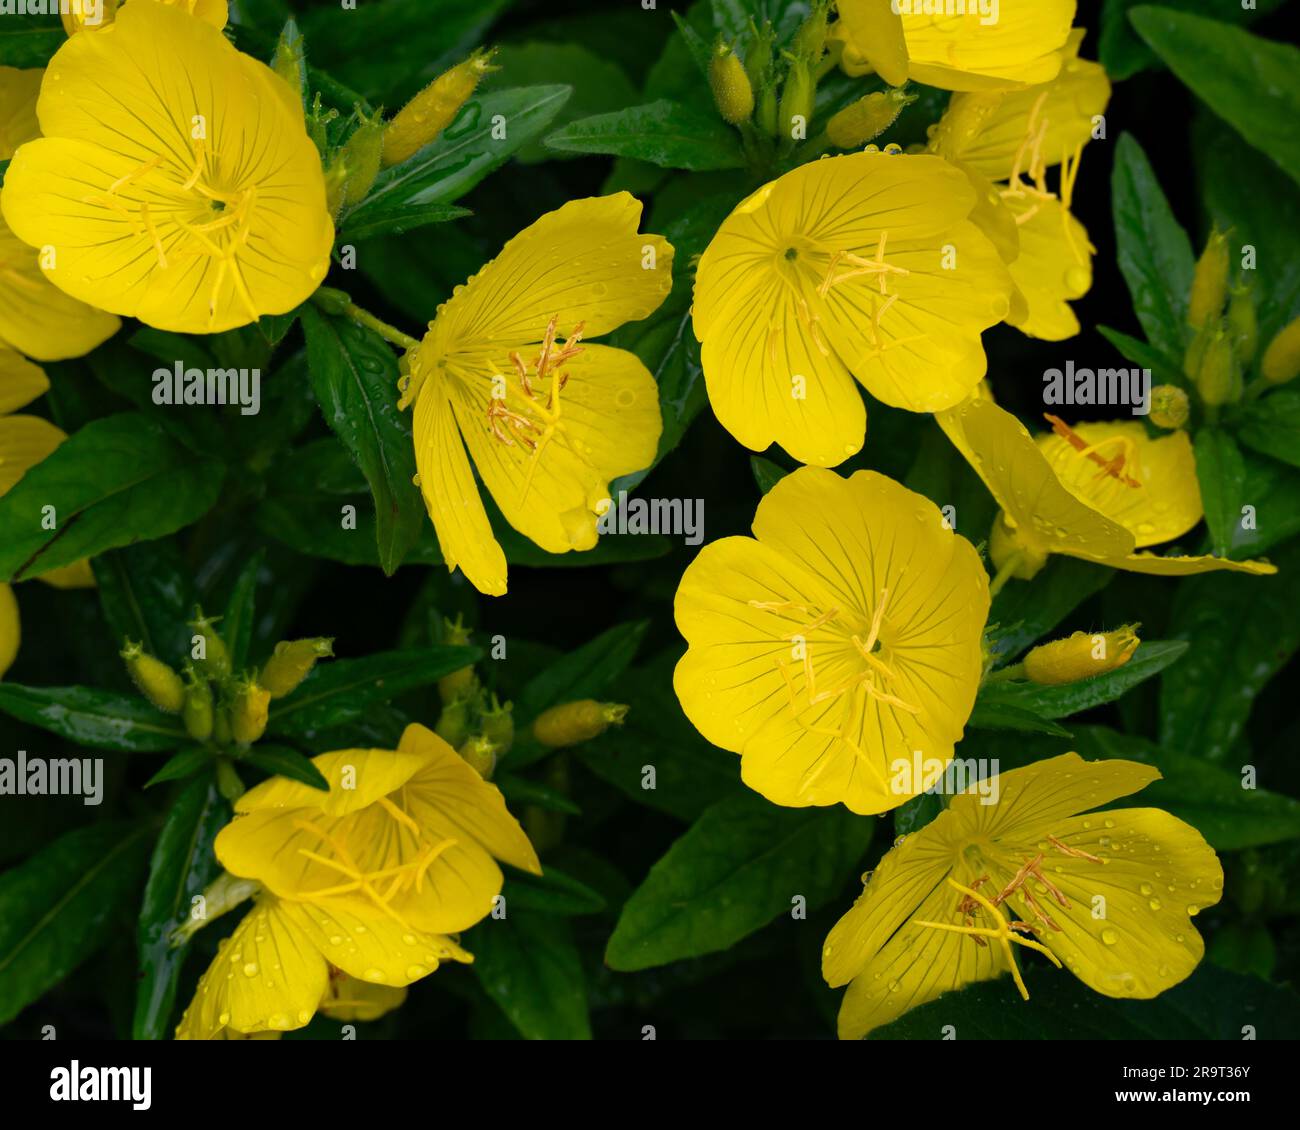 Common evening primrose flowers, oenothera biennis, growing in a garden in Speculator, NY USA Stock Photo